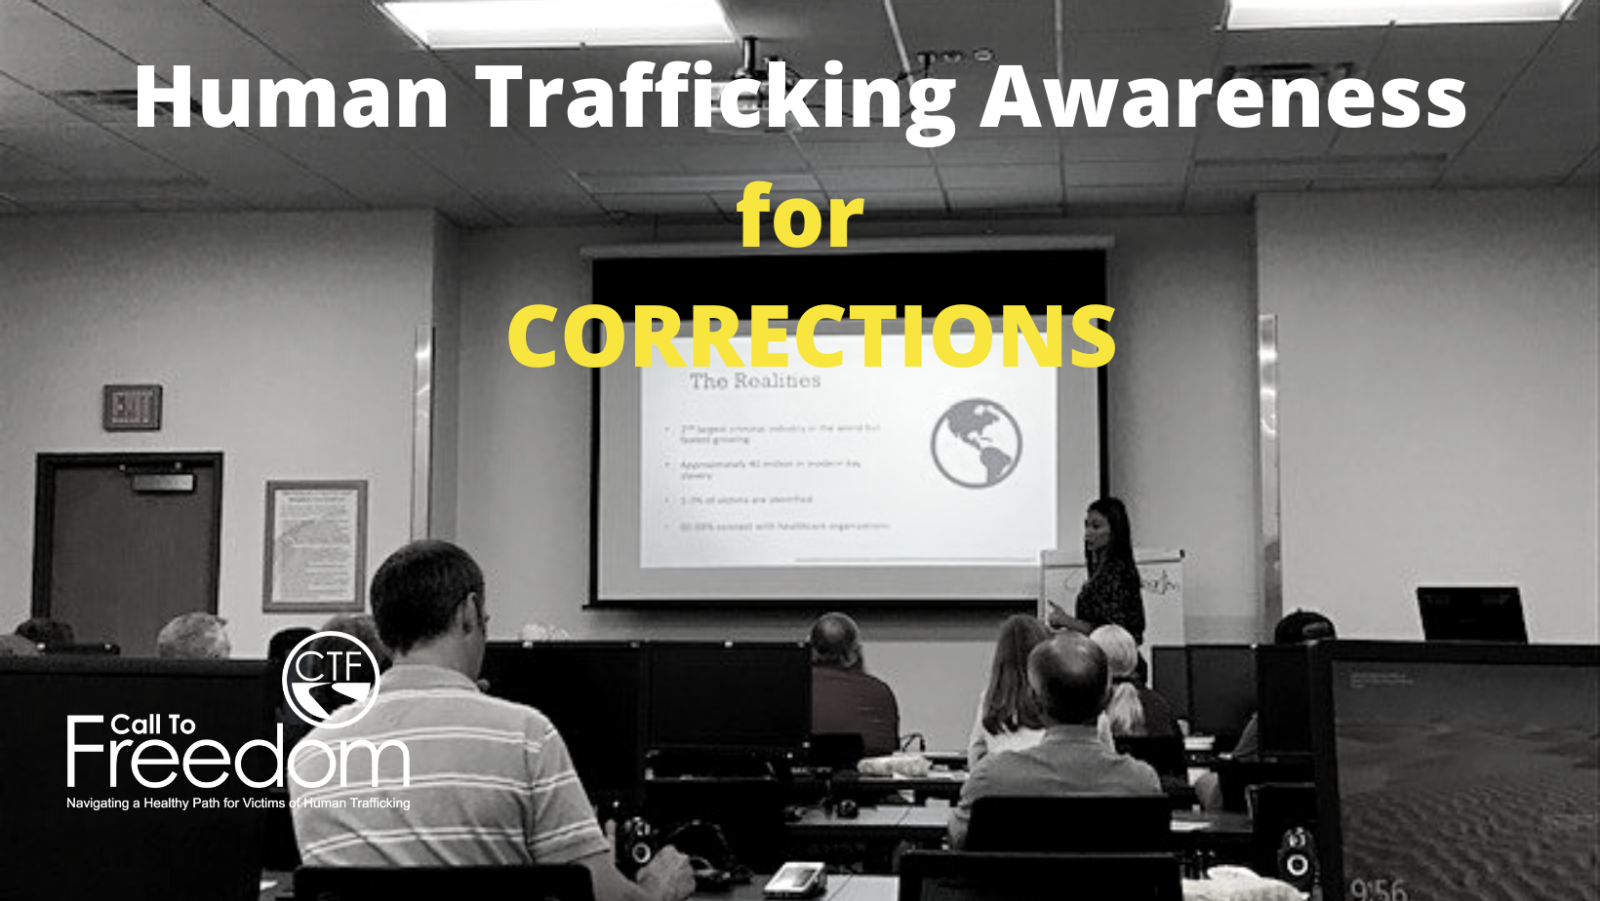 Human%20Trafficking%20Awareness%20for%20Corrections%20image.png